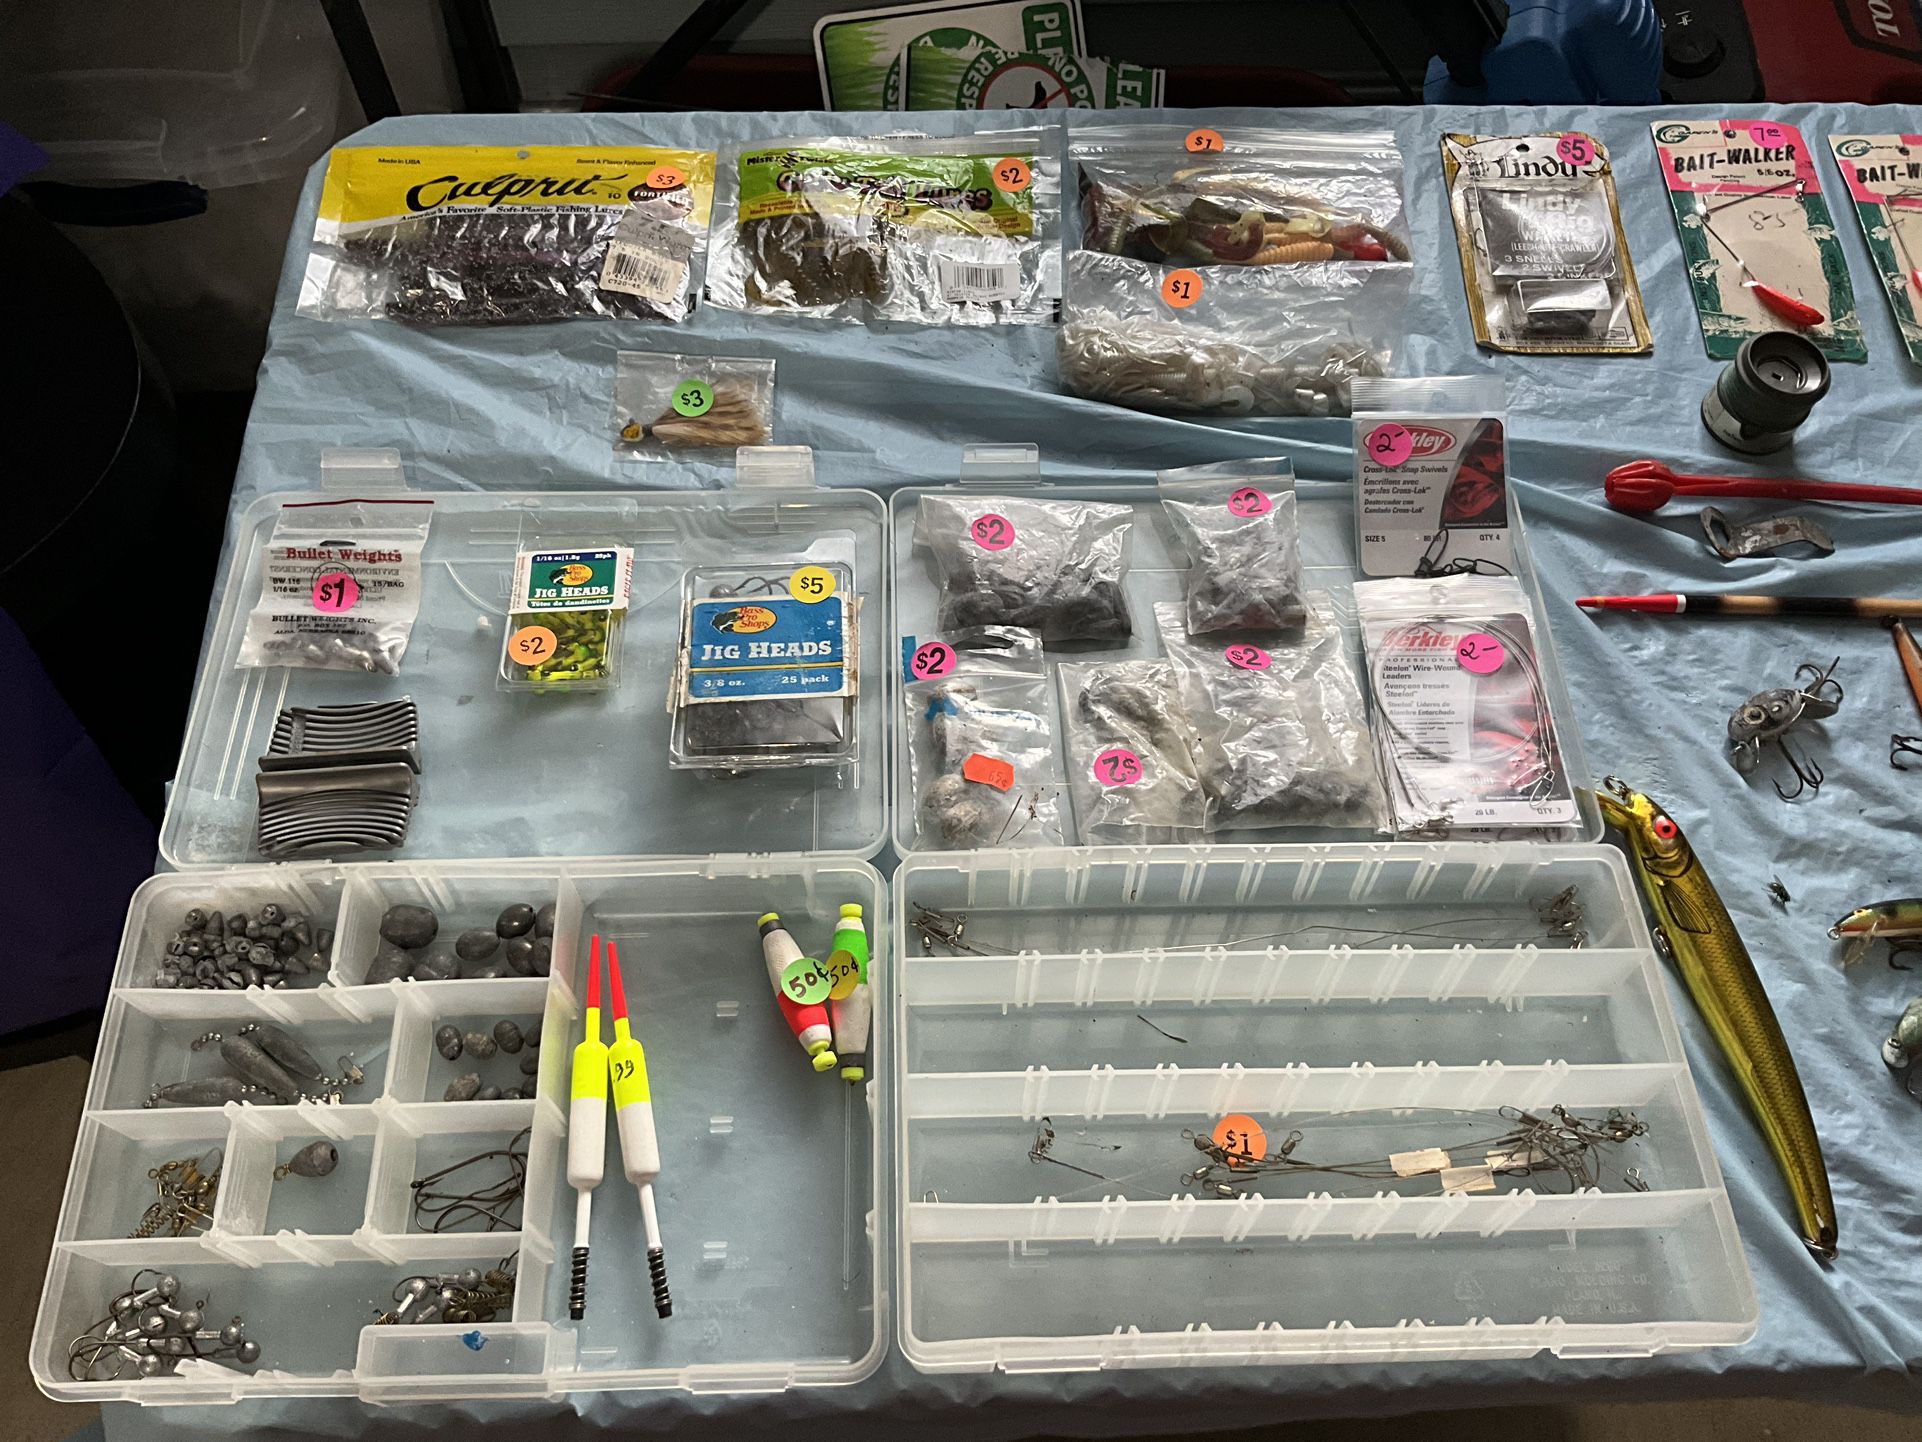 FISHING TACKLE-Weights, sinkers, lures, leaders, snap-on floats, bobbers, Plastic Lure Cases.